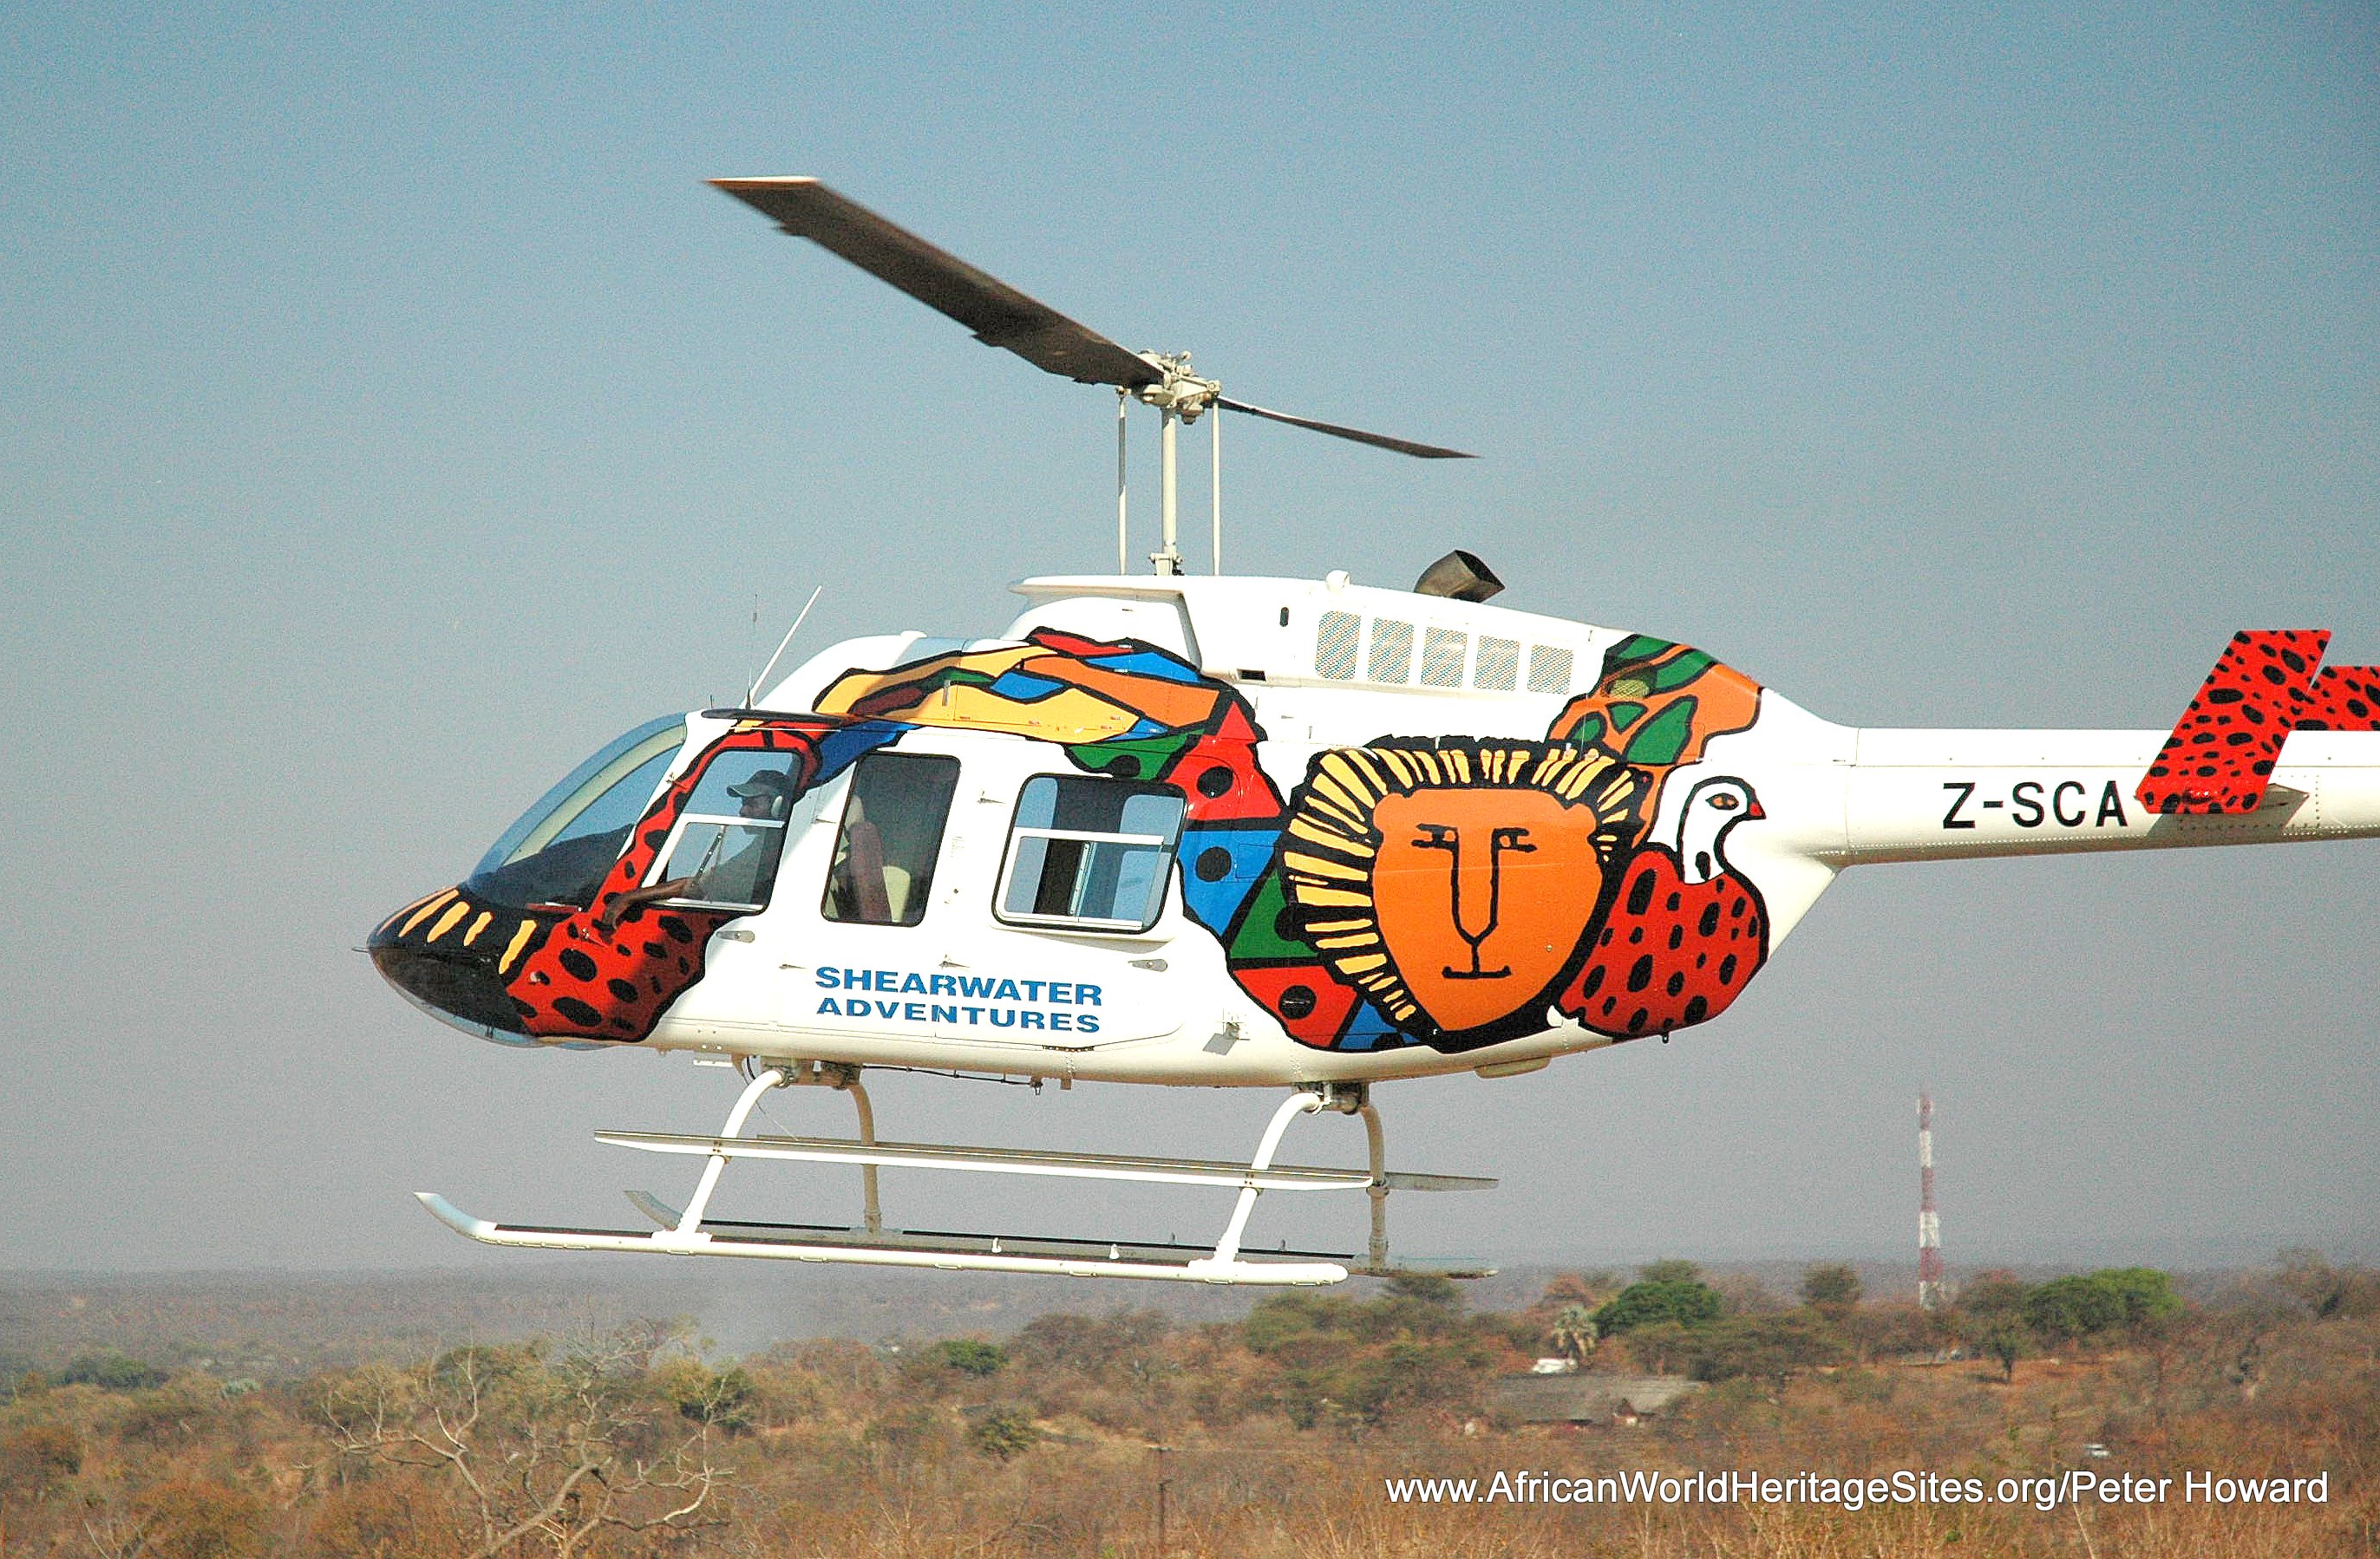 Helicopter rides are amongst the best ways to see the Victoria Falls/Mosi-oa-tunya National Parks and surrounding areas